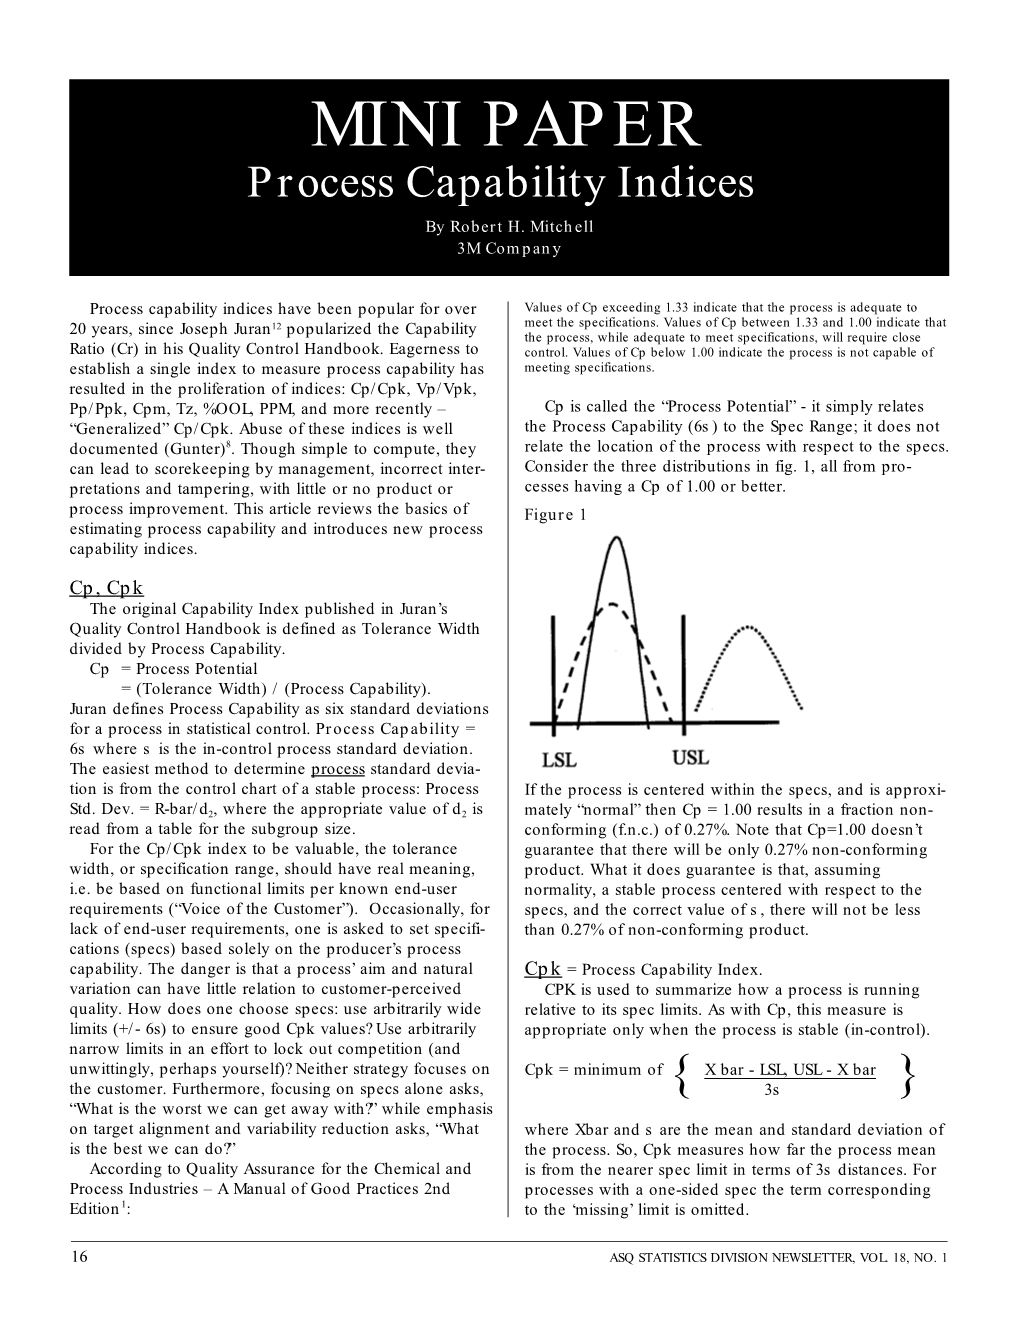 Process Capability Indices by Robert H